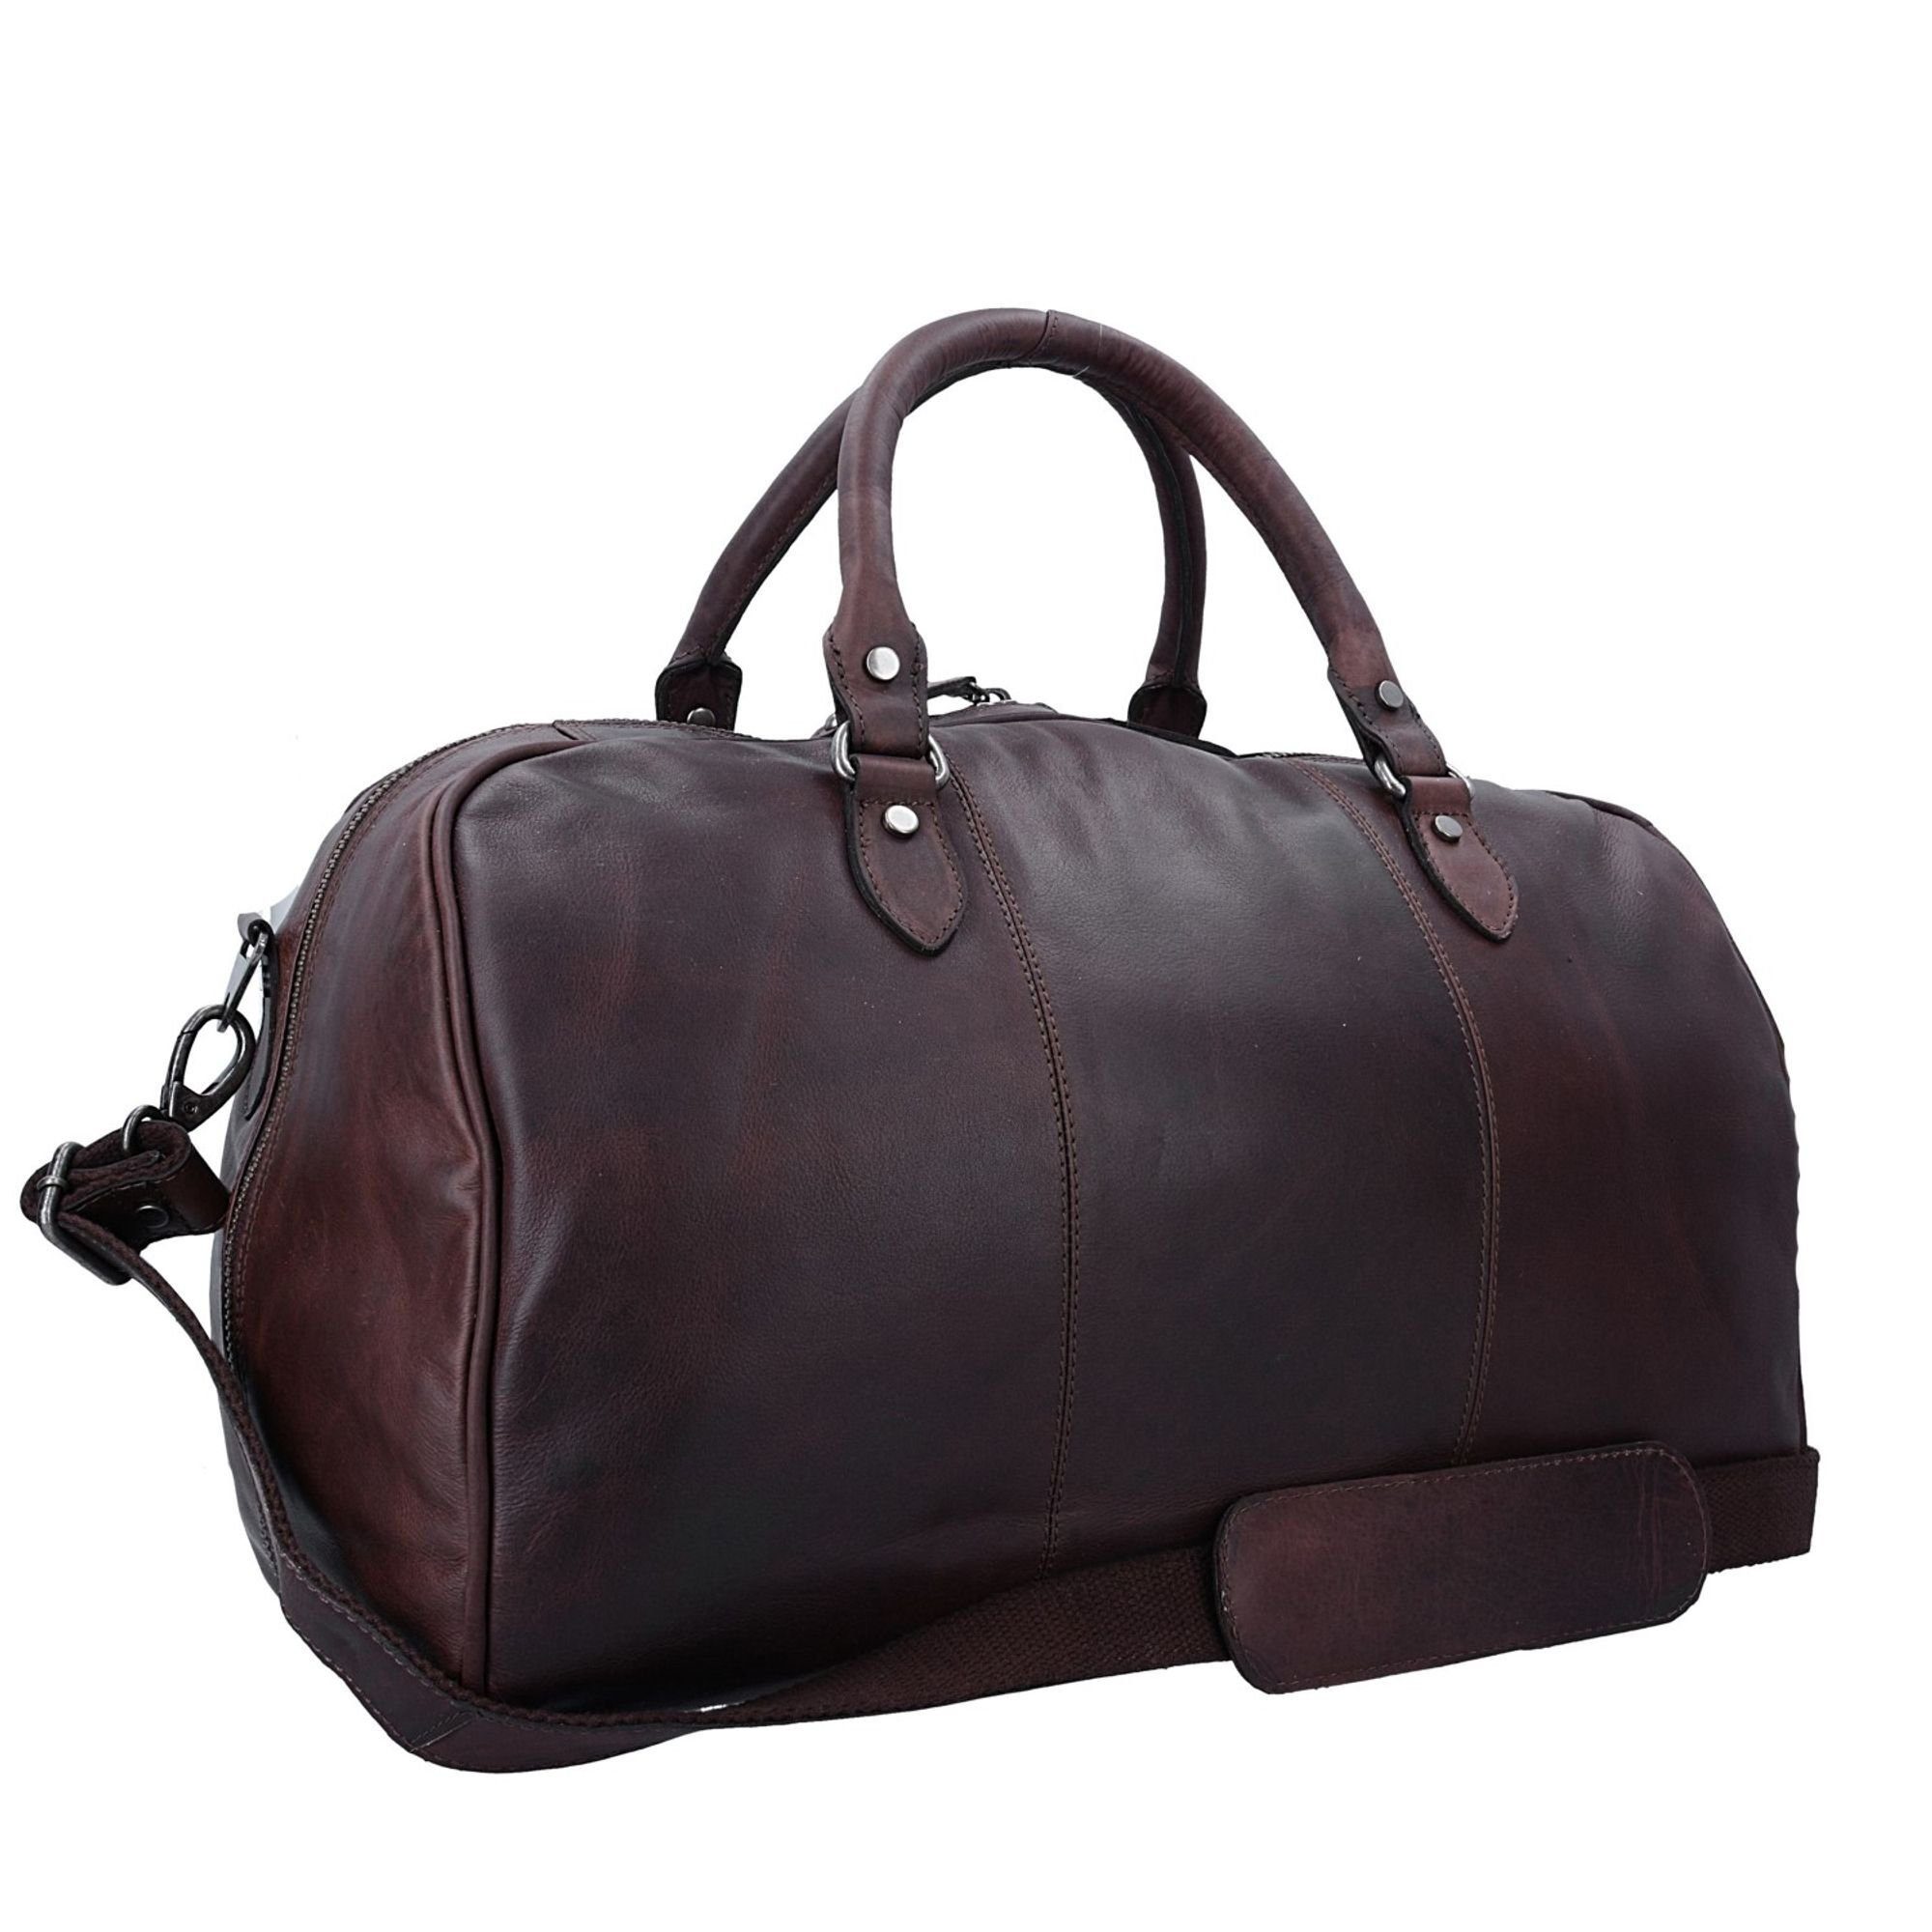 Chesterfield Brand Up, Leder Pull The brown Wax Weekender